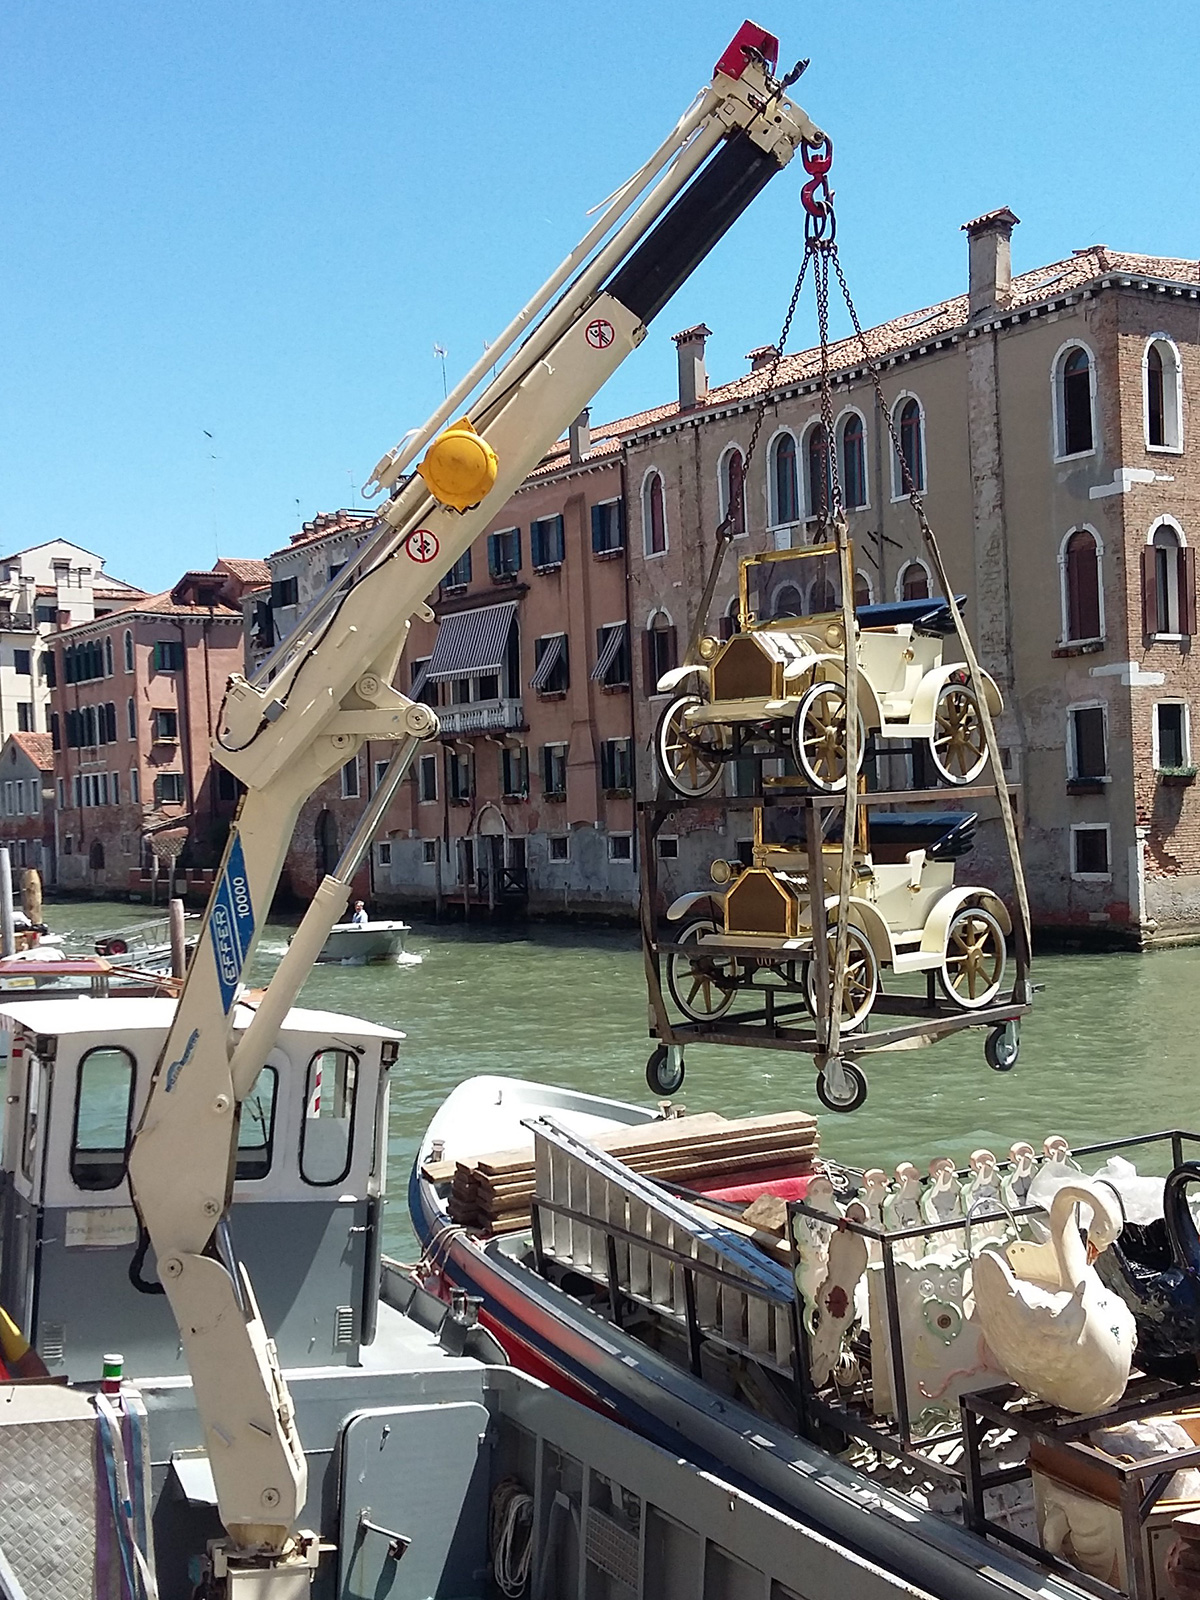 Our quay in the Tronchetto area: loading materials for events into a boat